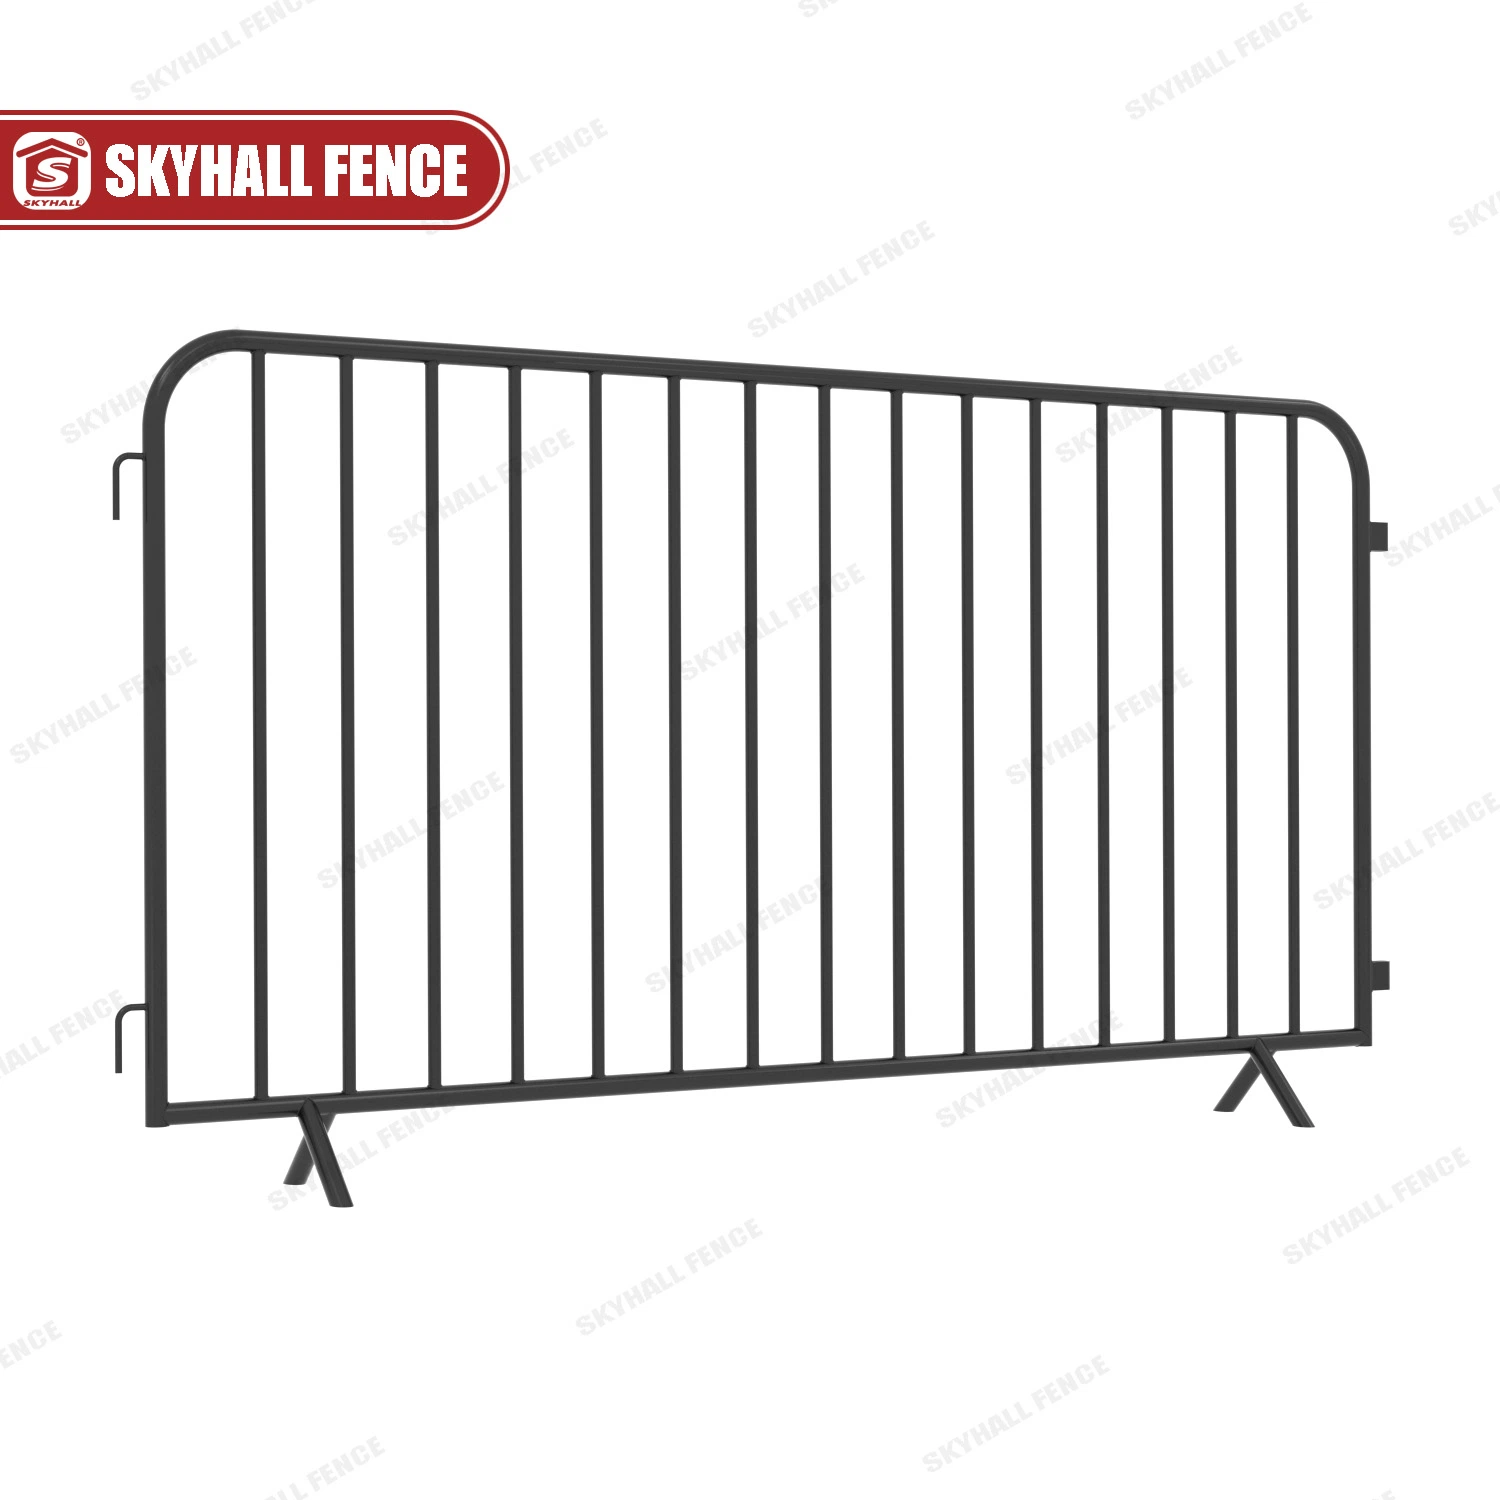 Roadway Barriers Parking Barrier Temporary Safety and Crowd Control Barriers